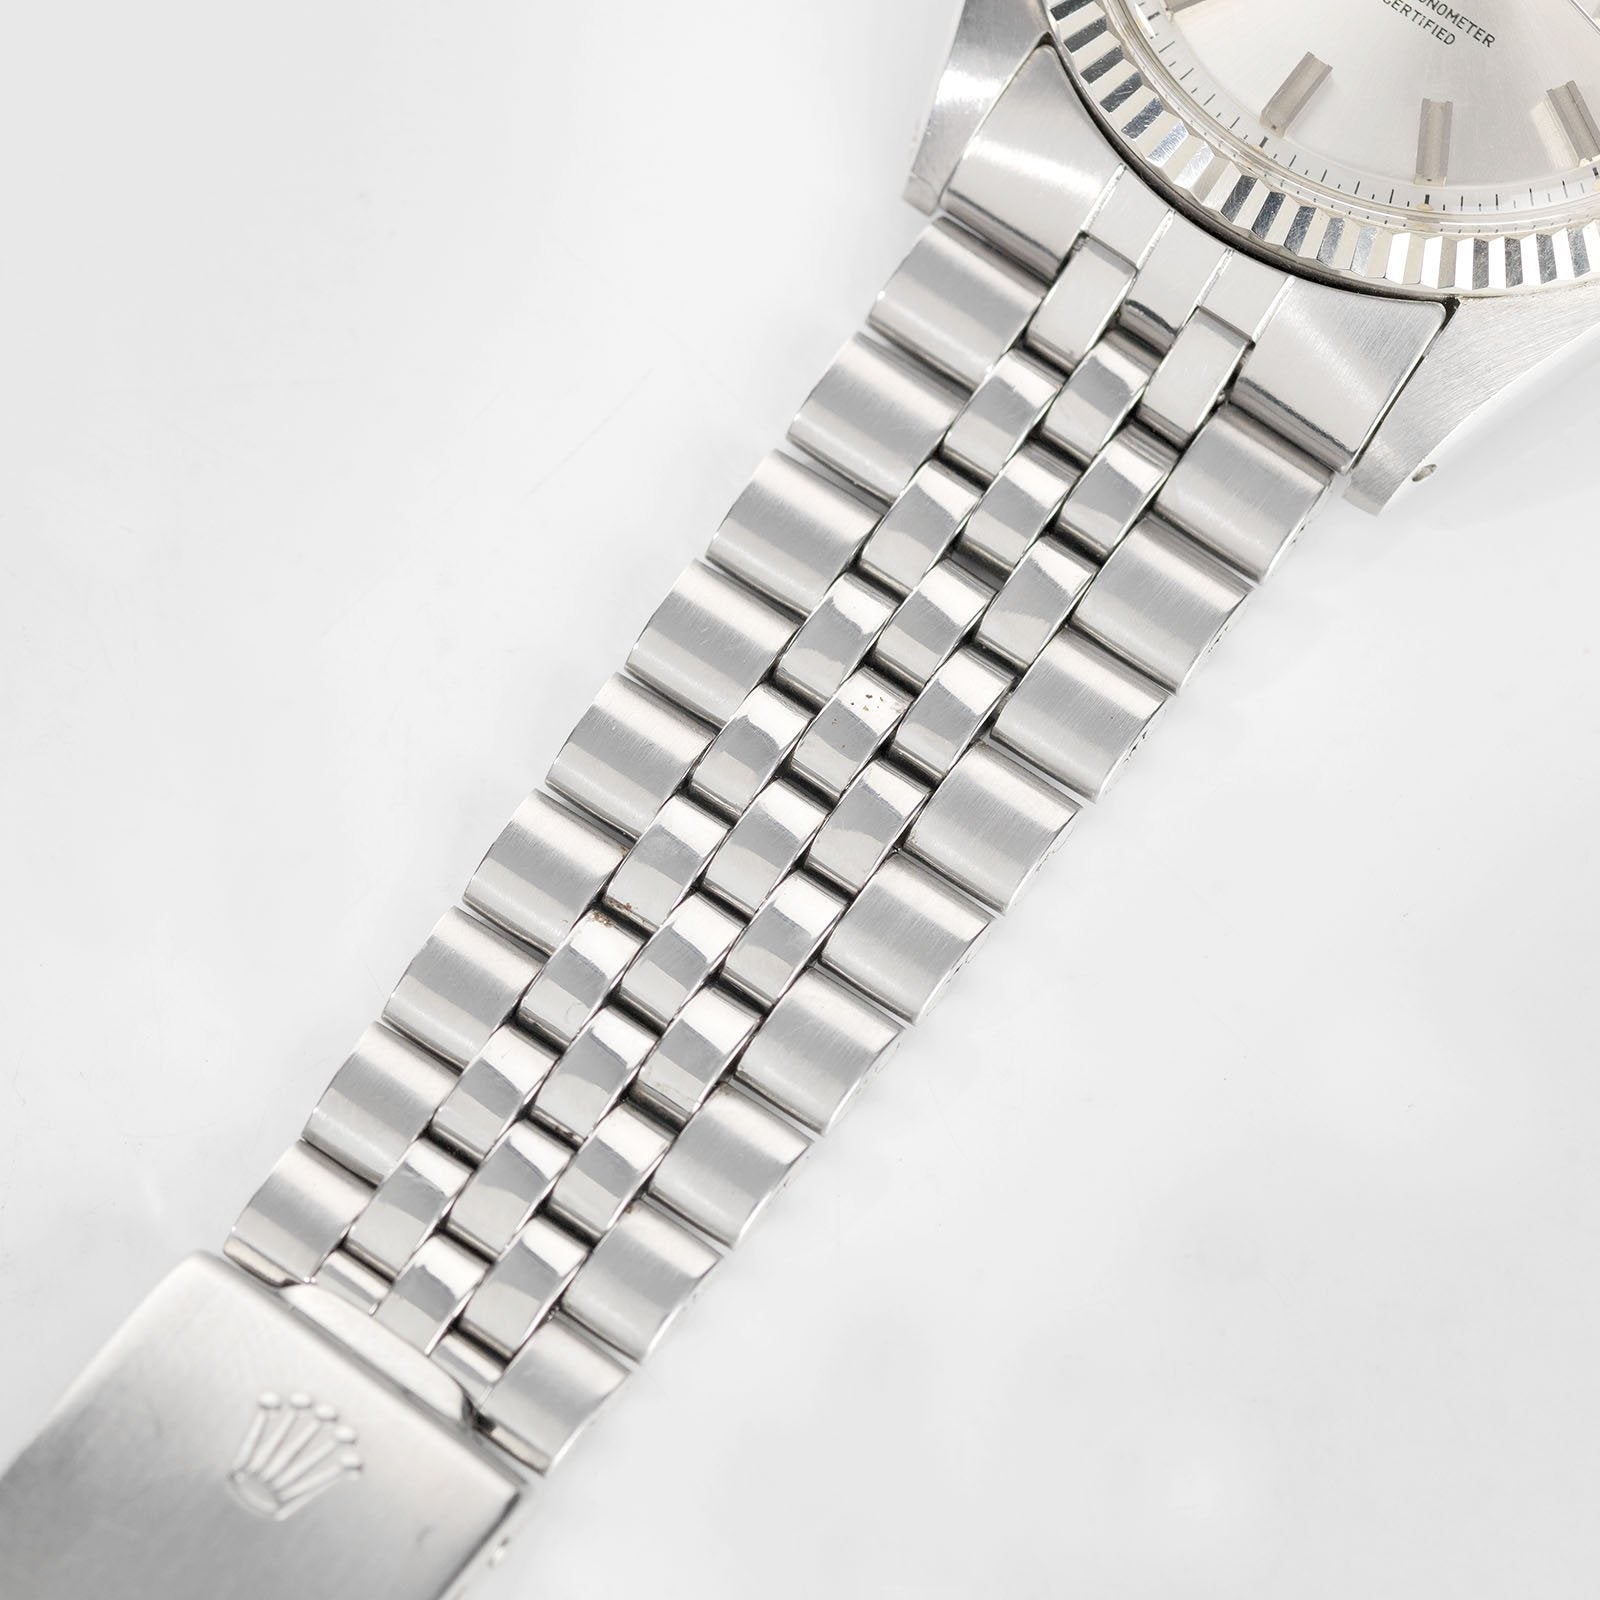 Rolex Datejust Reference 1601 Wideboy Dial